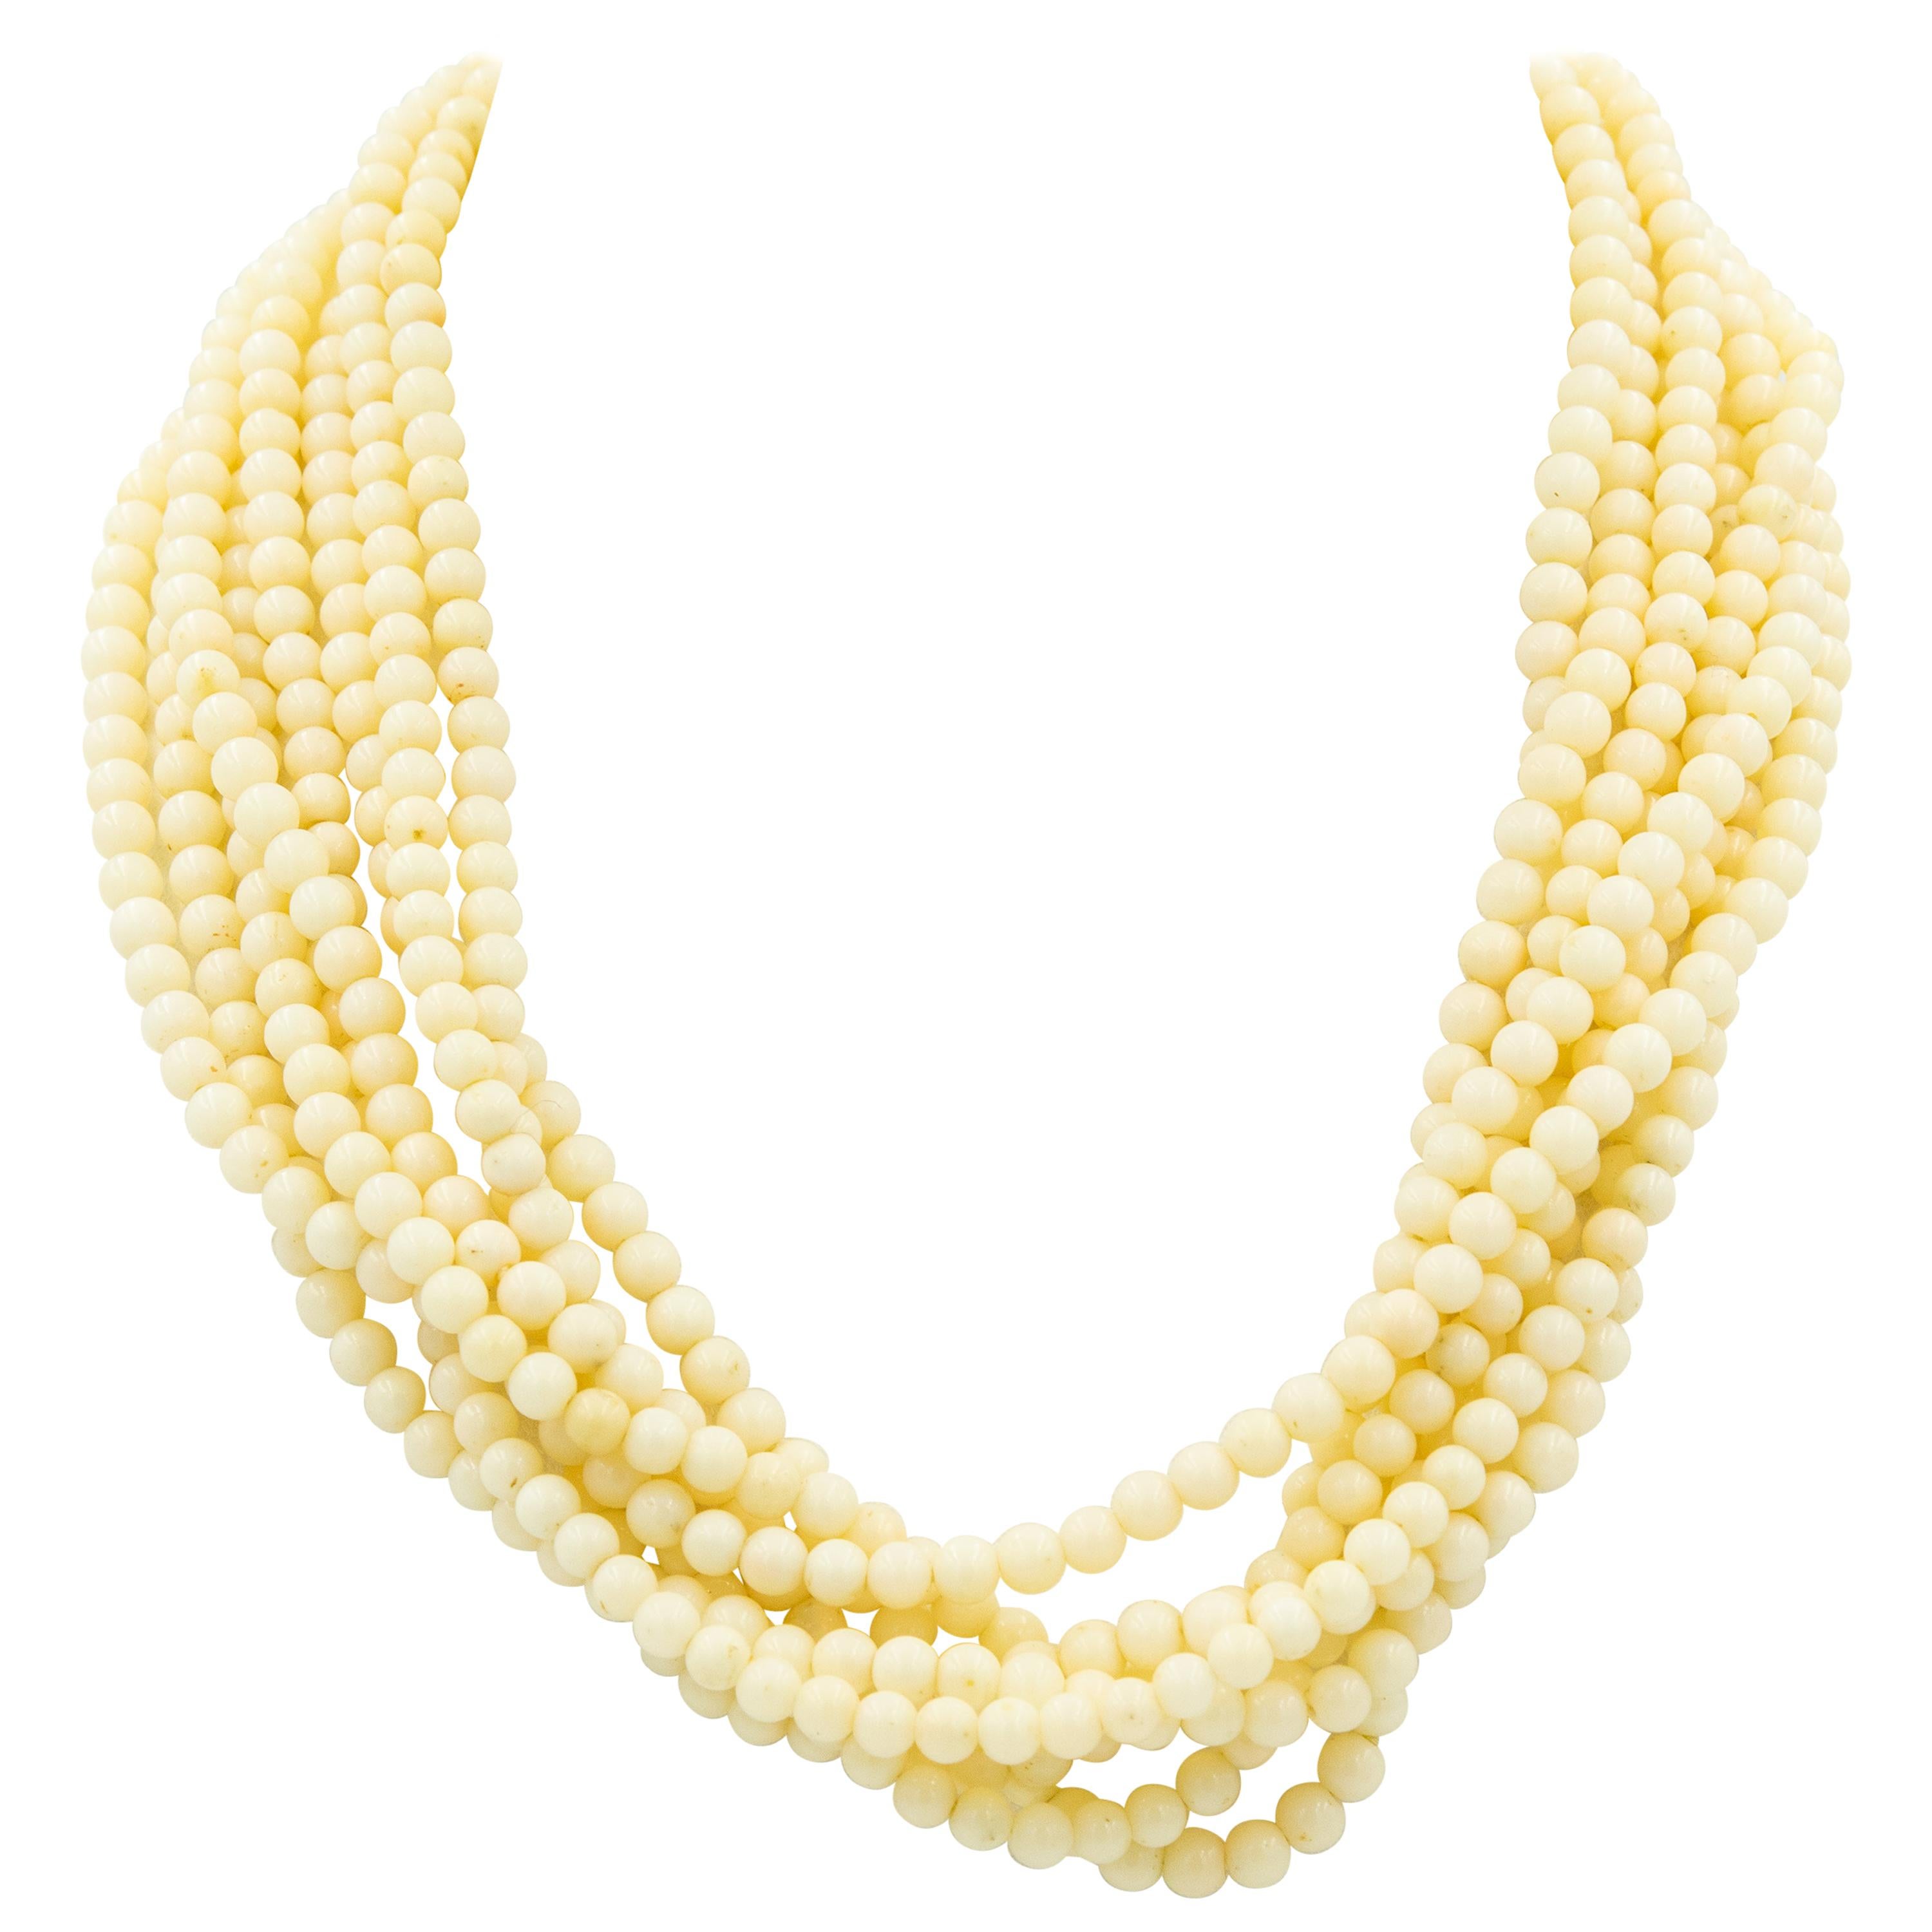 Pale 8-Strand Angel Skin Coral Bead Multi-Strand Necklace Gold Filagree Clasp